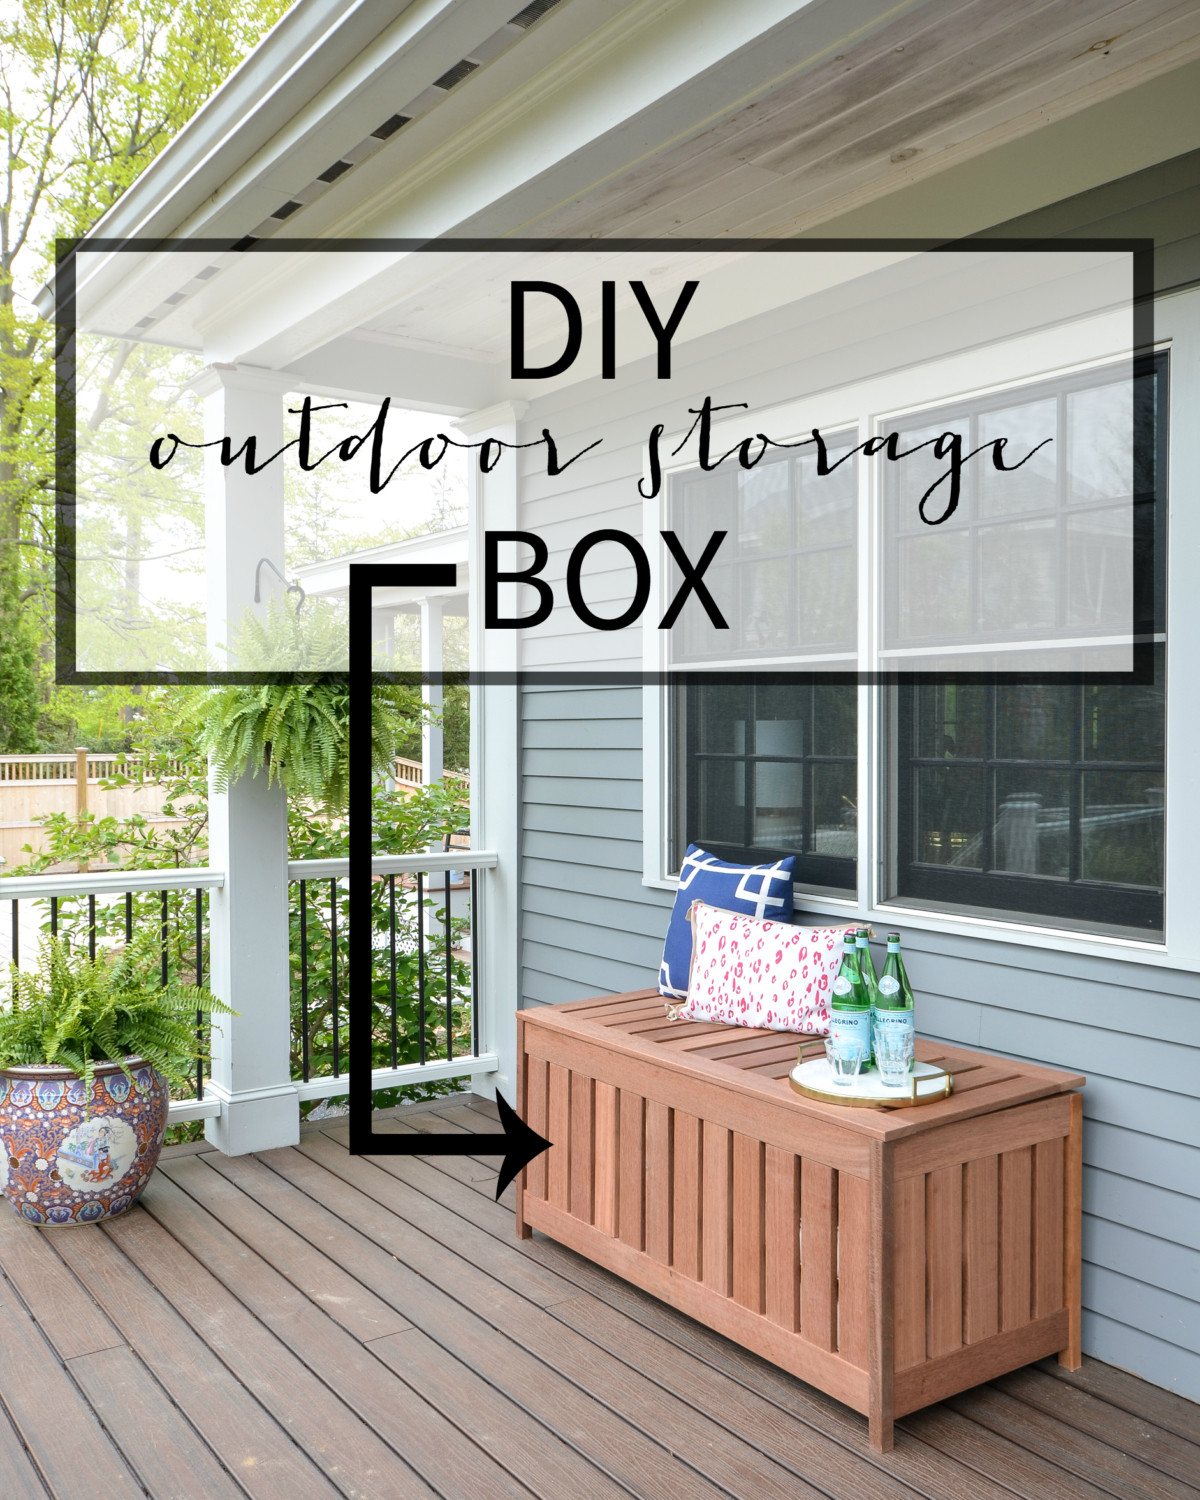 DIY Outdoor Cushion Storage
 DIY Outdoor Storage Box The Chronicles of Home